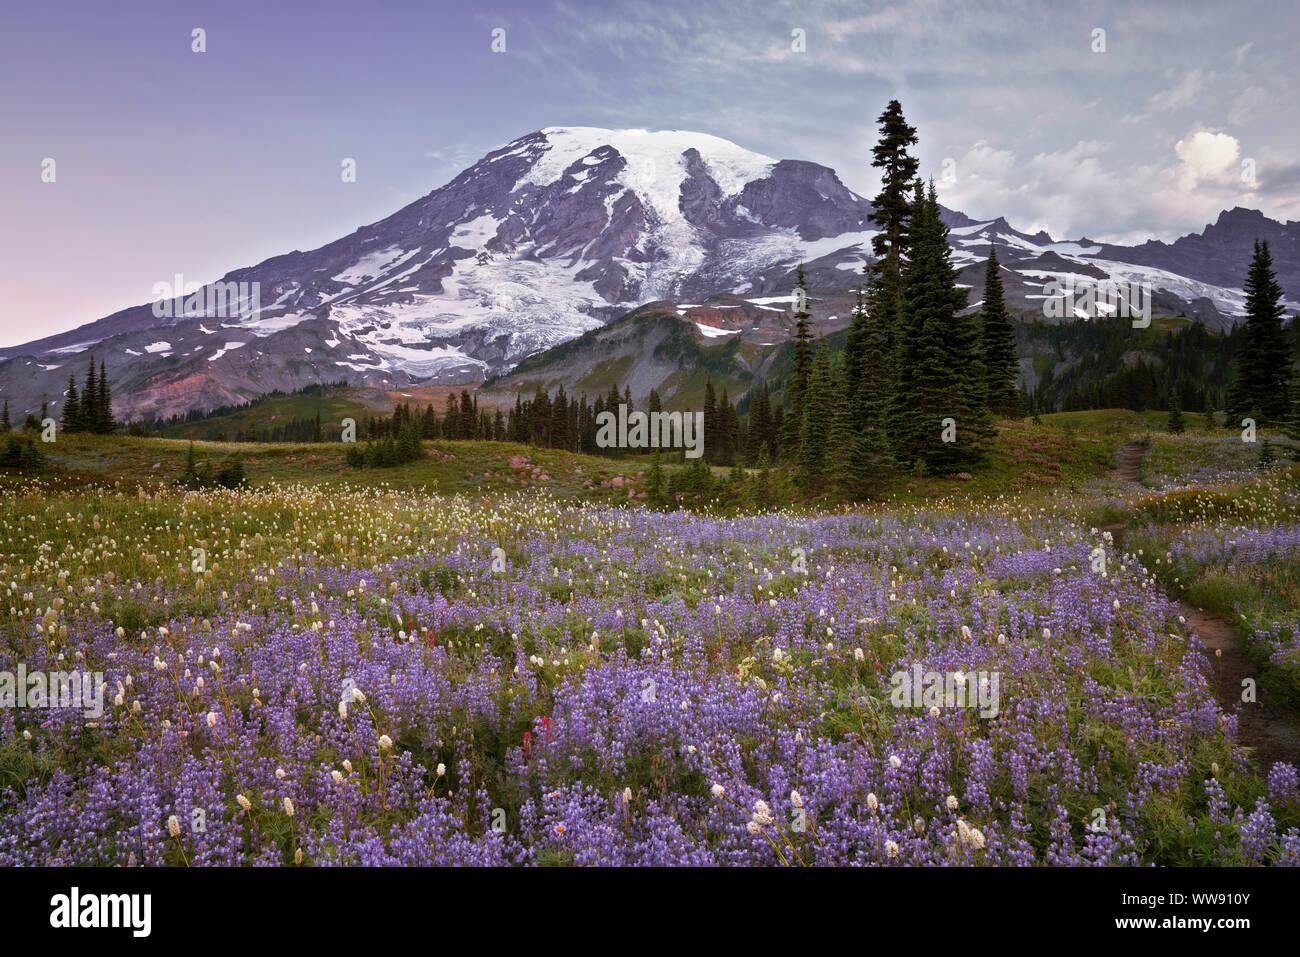 The soft cottony bloom of bistort gives a snowy appearance among the fog in the Paradise Meadow of Washington’s Mt Rainier National Park. Stock Photo